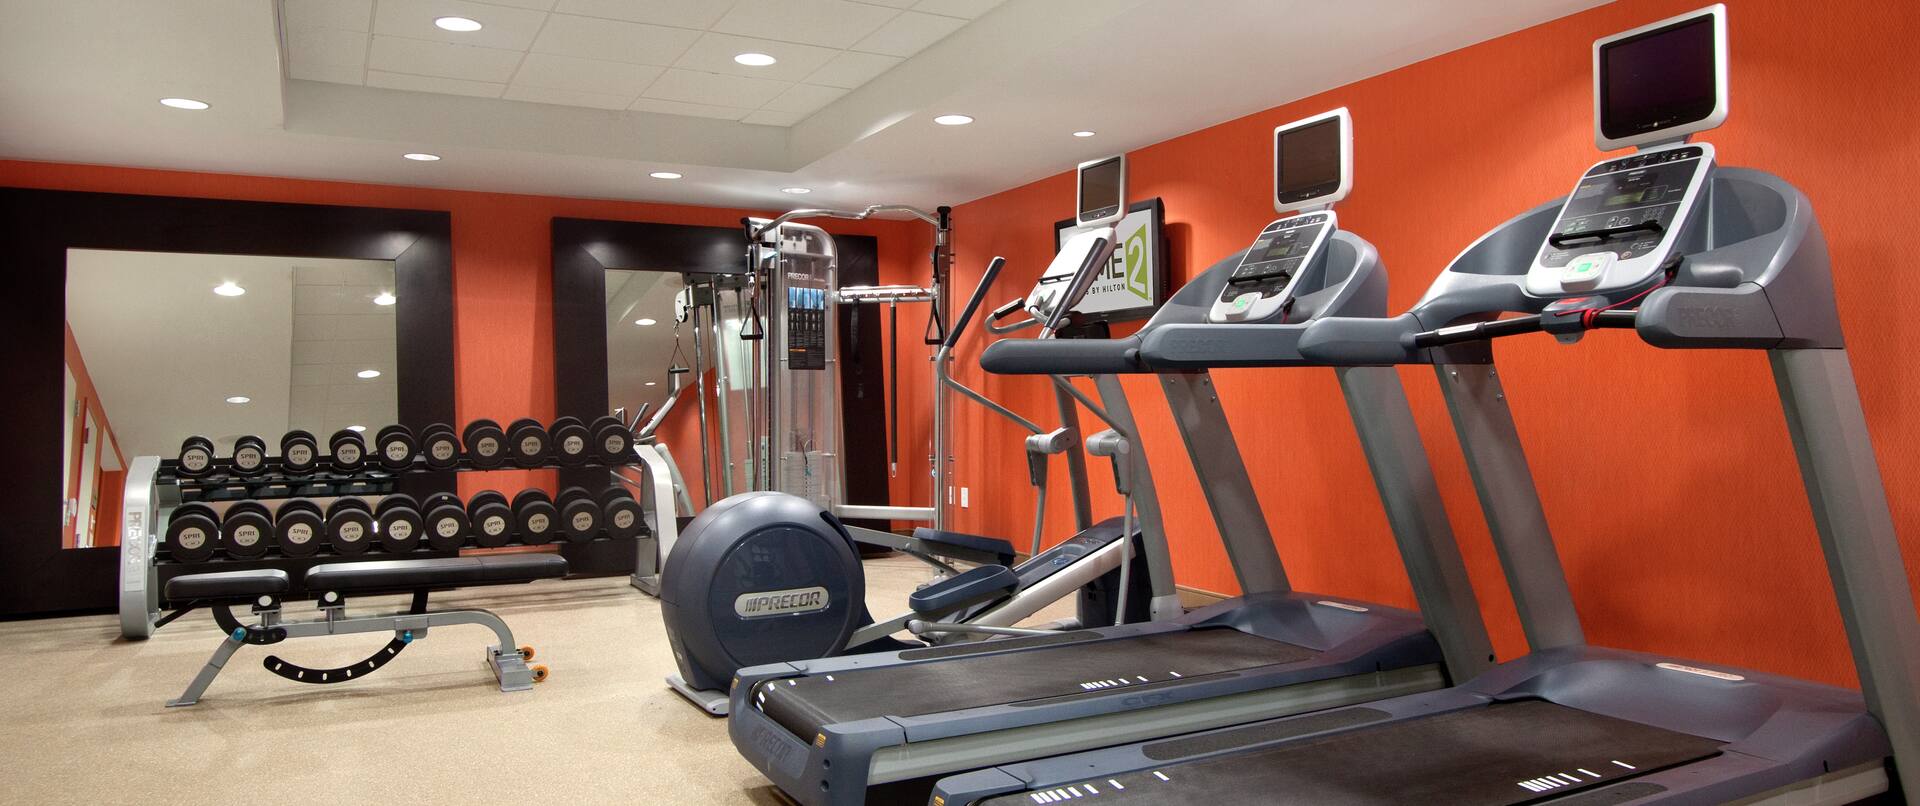 Free Weights, Bench, Weight MAchine, and Cardio Equipment in Spin2Cycle Fitness Area